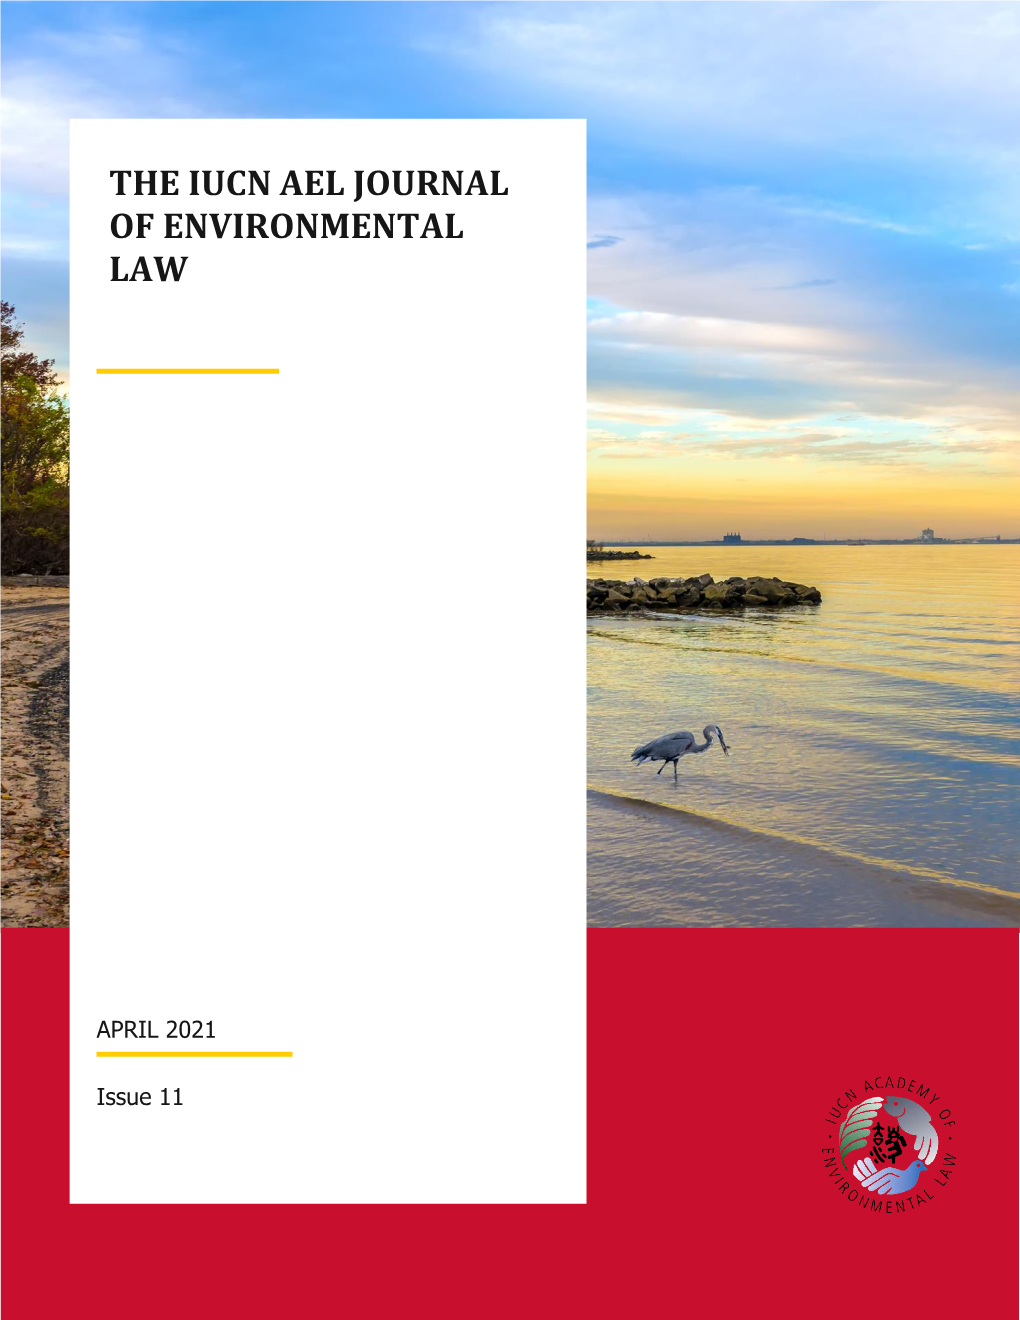 The Iucn Ael Journal of Environmental Law